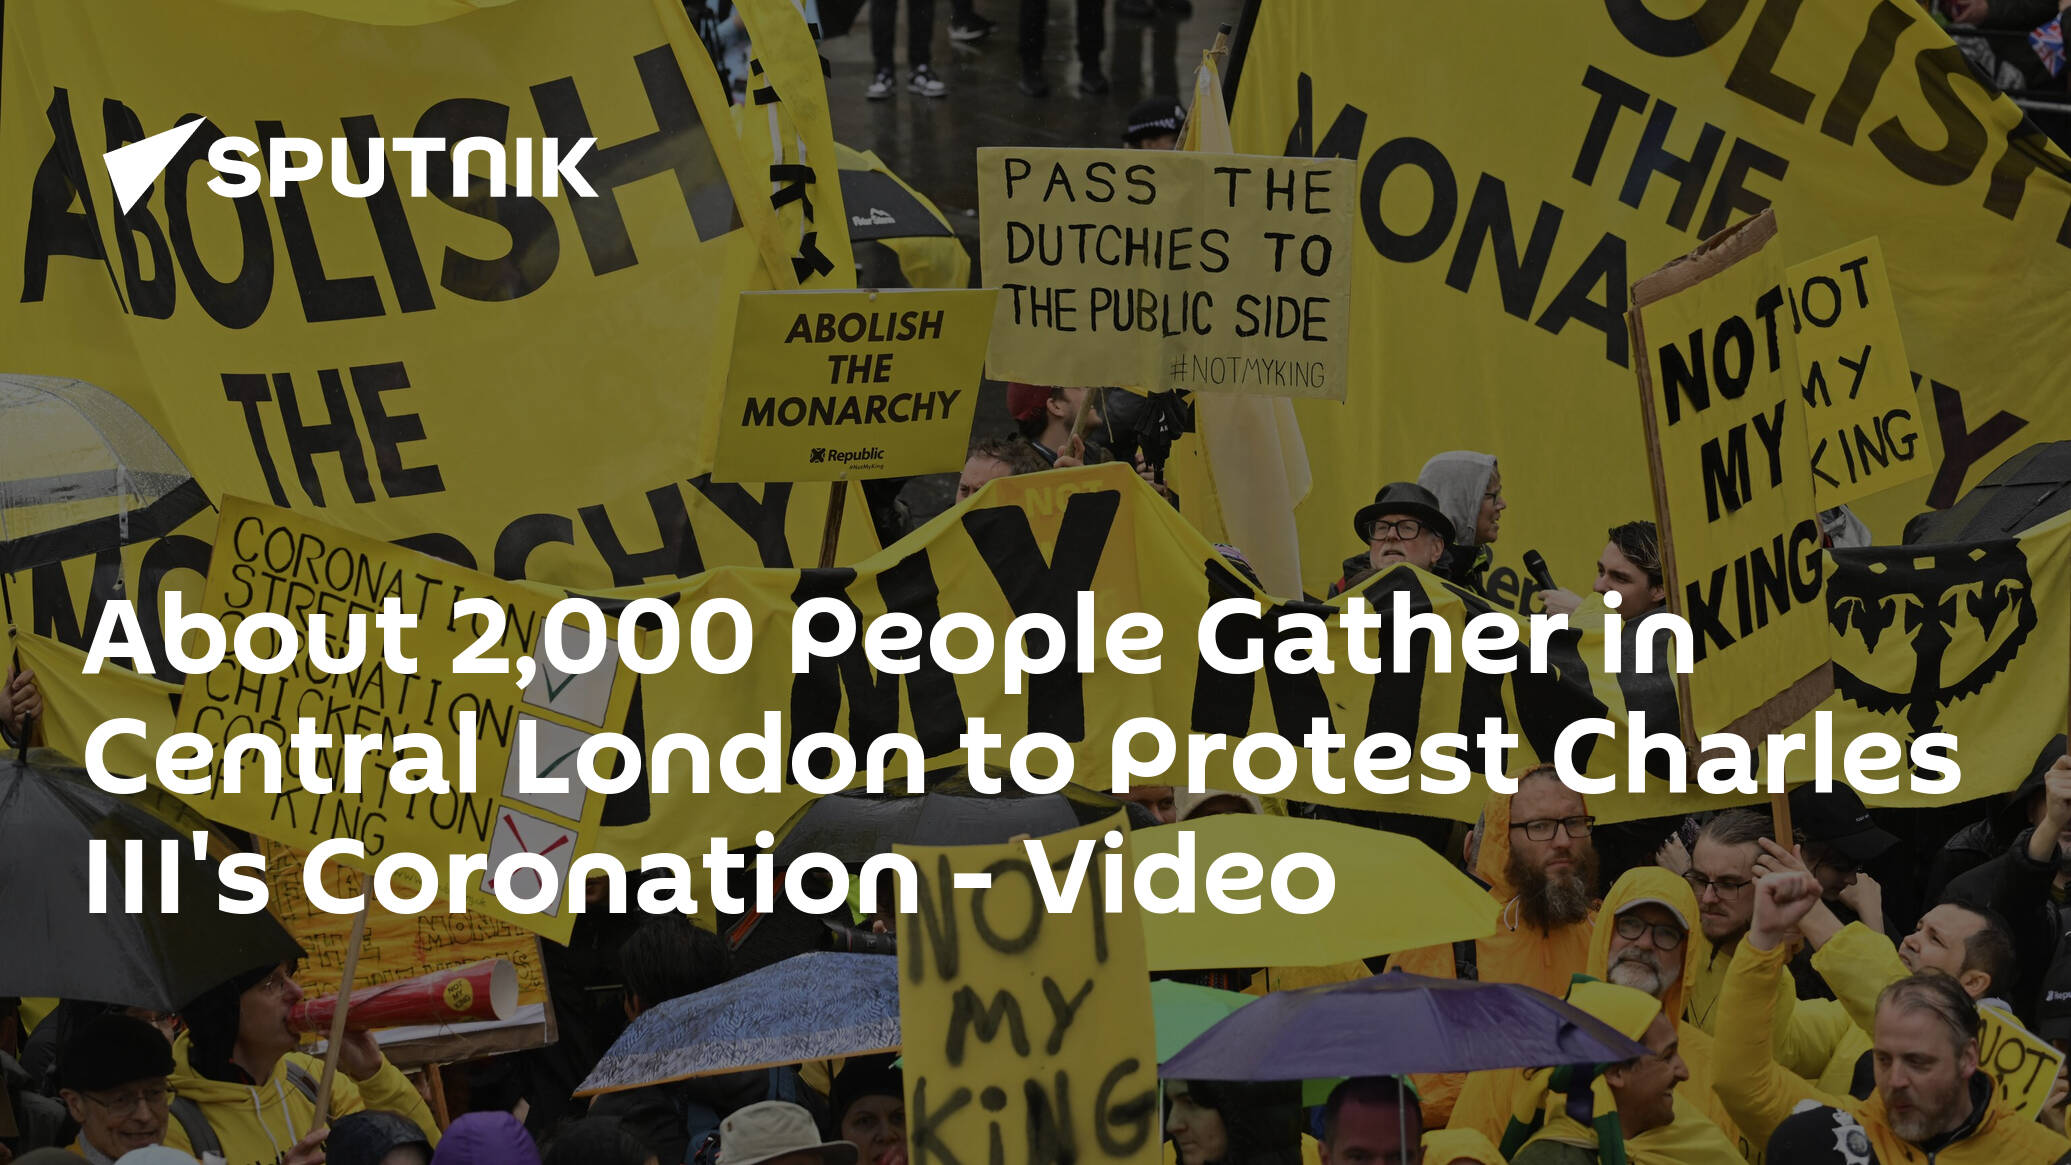 About 2,000 People Gather in Central London to Protest Charles III's Coronation – Video